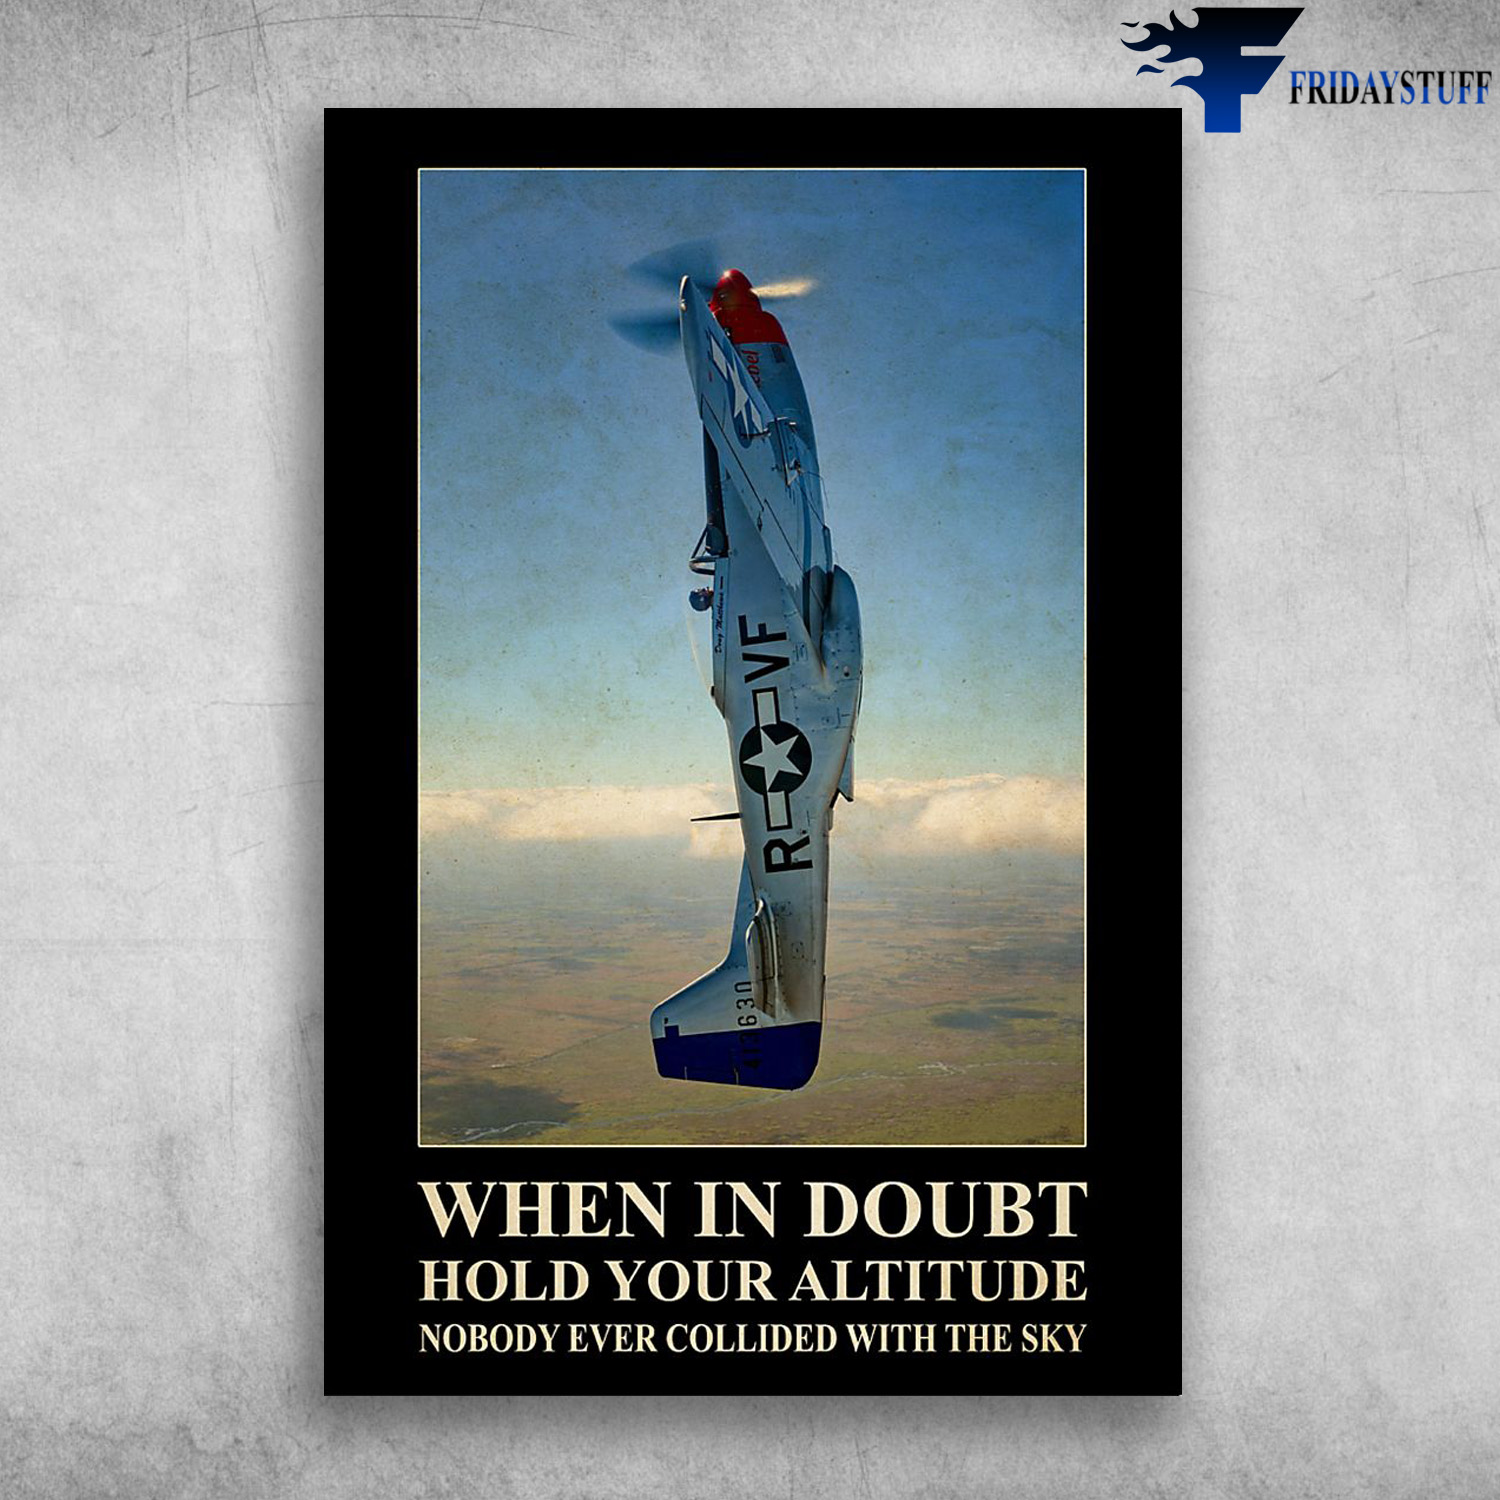 The Airplane - When I Doubt, Hold Your Altitude, Nobody Ever Collided With The Sky